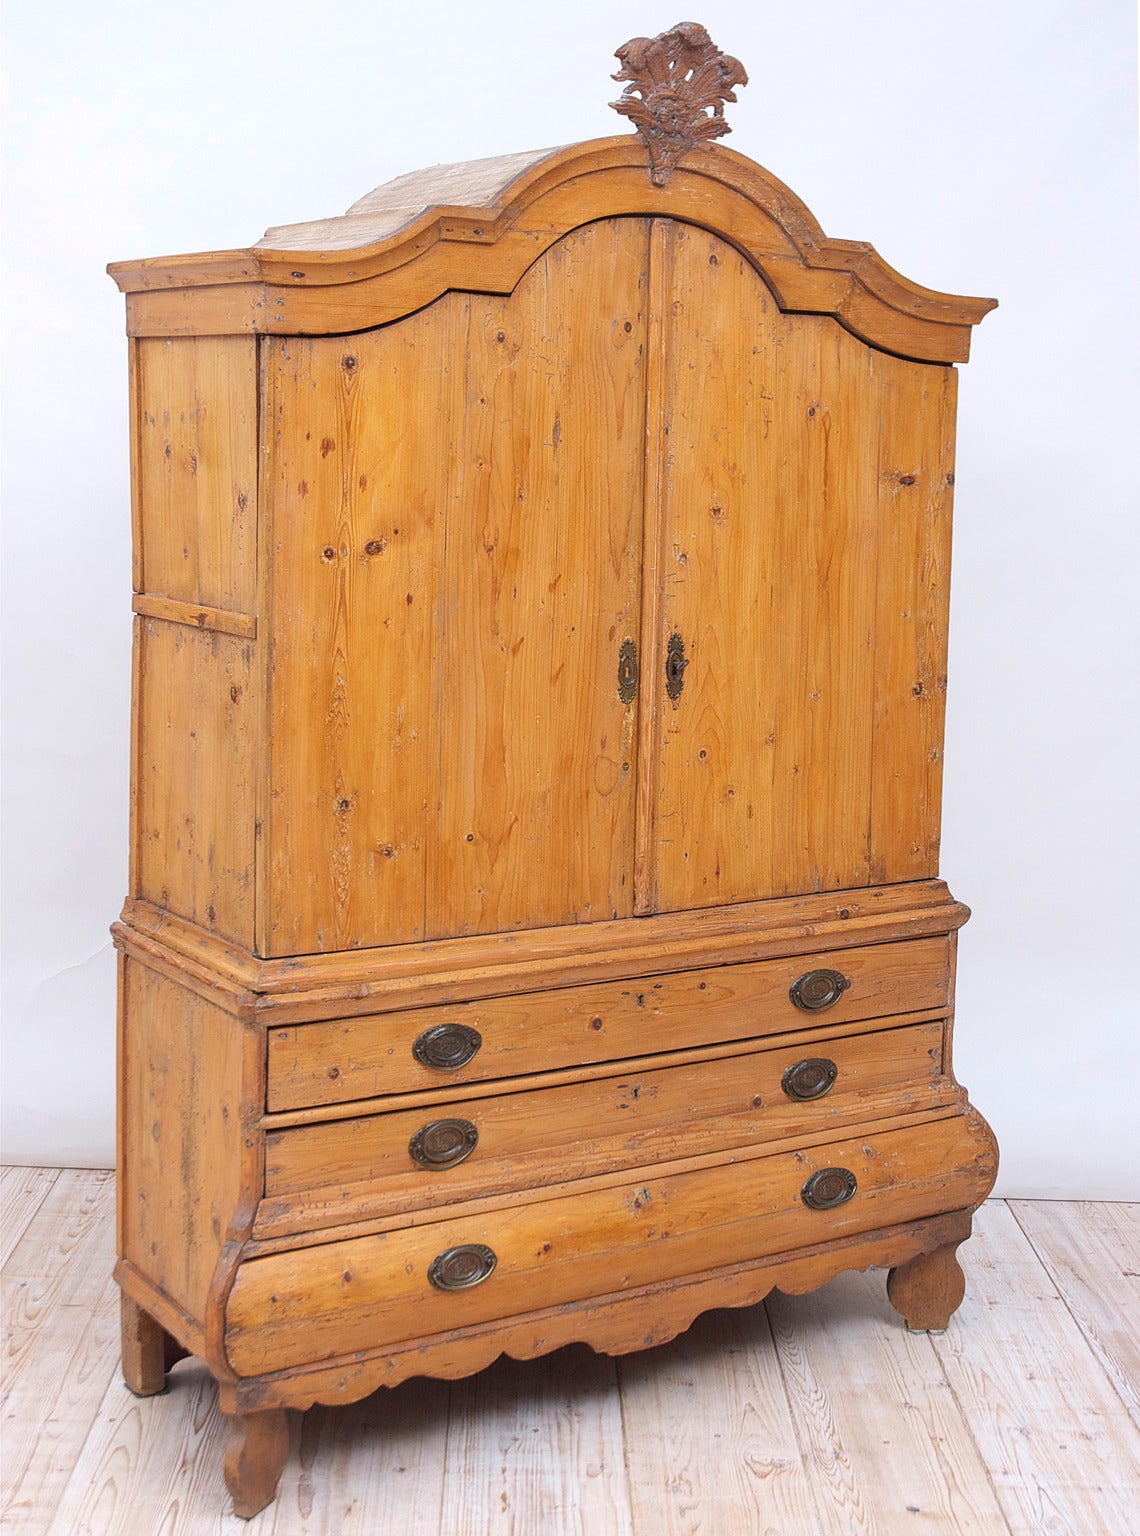 A very lovely and diminutive linen press or kast in pine from Holland with bombe front, offering two cupboard doors over three long drawers with carved bonnet and resting on the original feet, Dutch, early 1700s.

Dimensions: 58